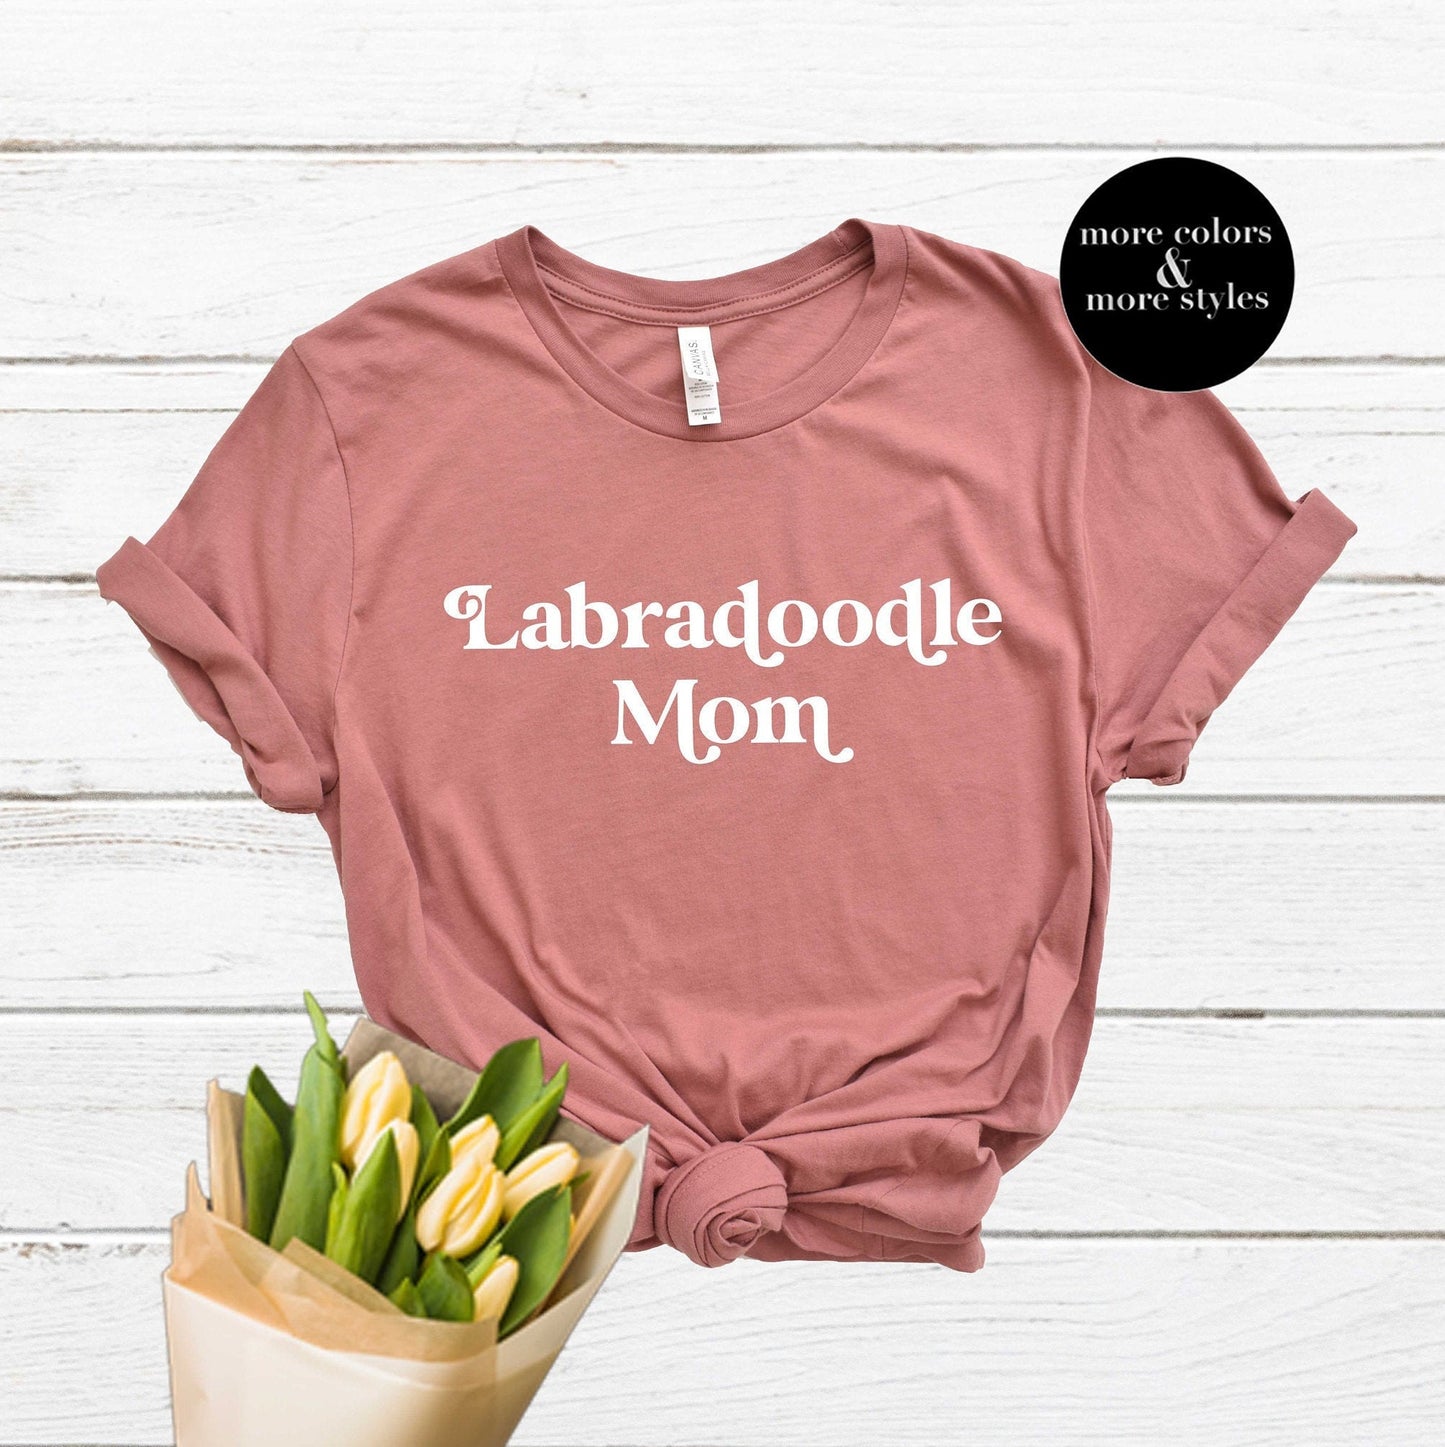 Labradoodle Mom Shirt | Graphic Tee | Labradoodle Shirt | Labradoodle Sweatshirt | Labradoodle Mom Gift | Gift for Labradoodle Mom